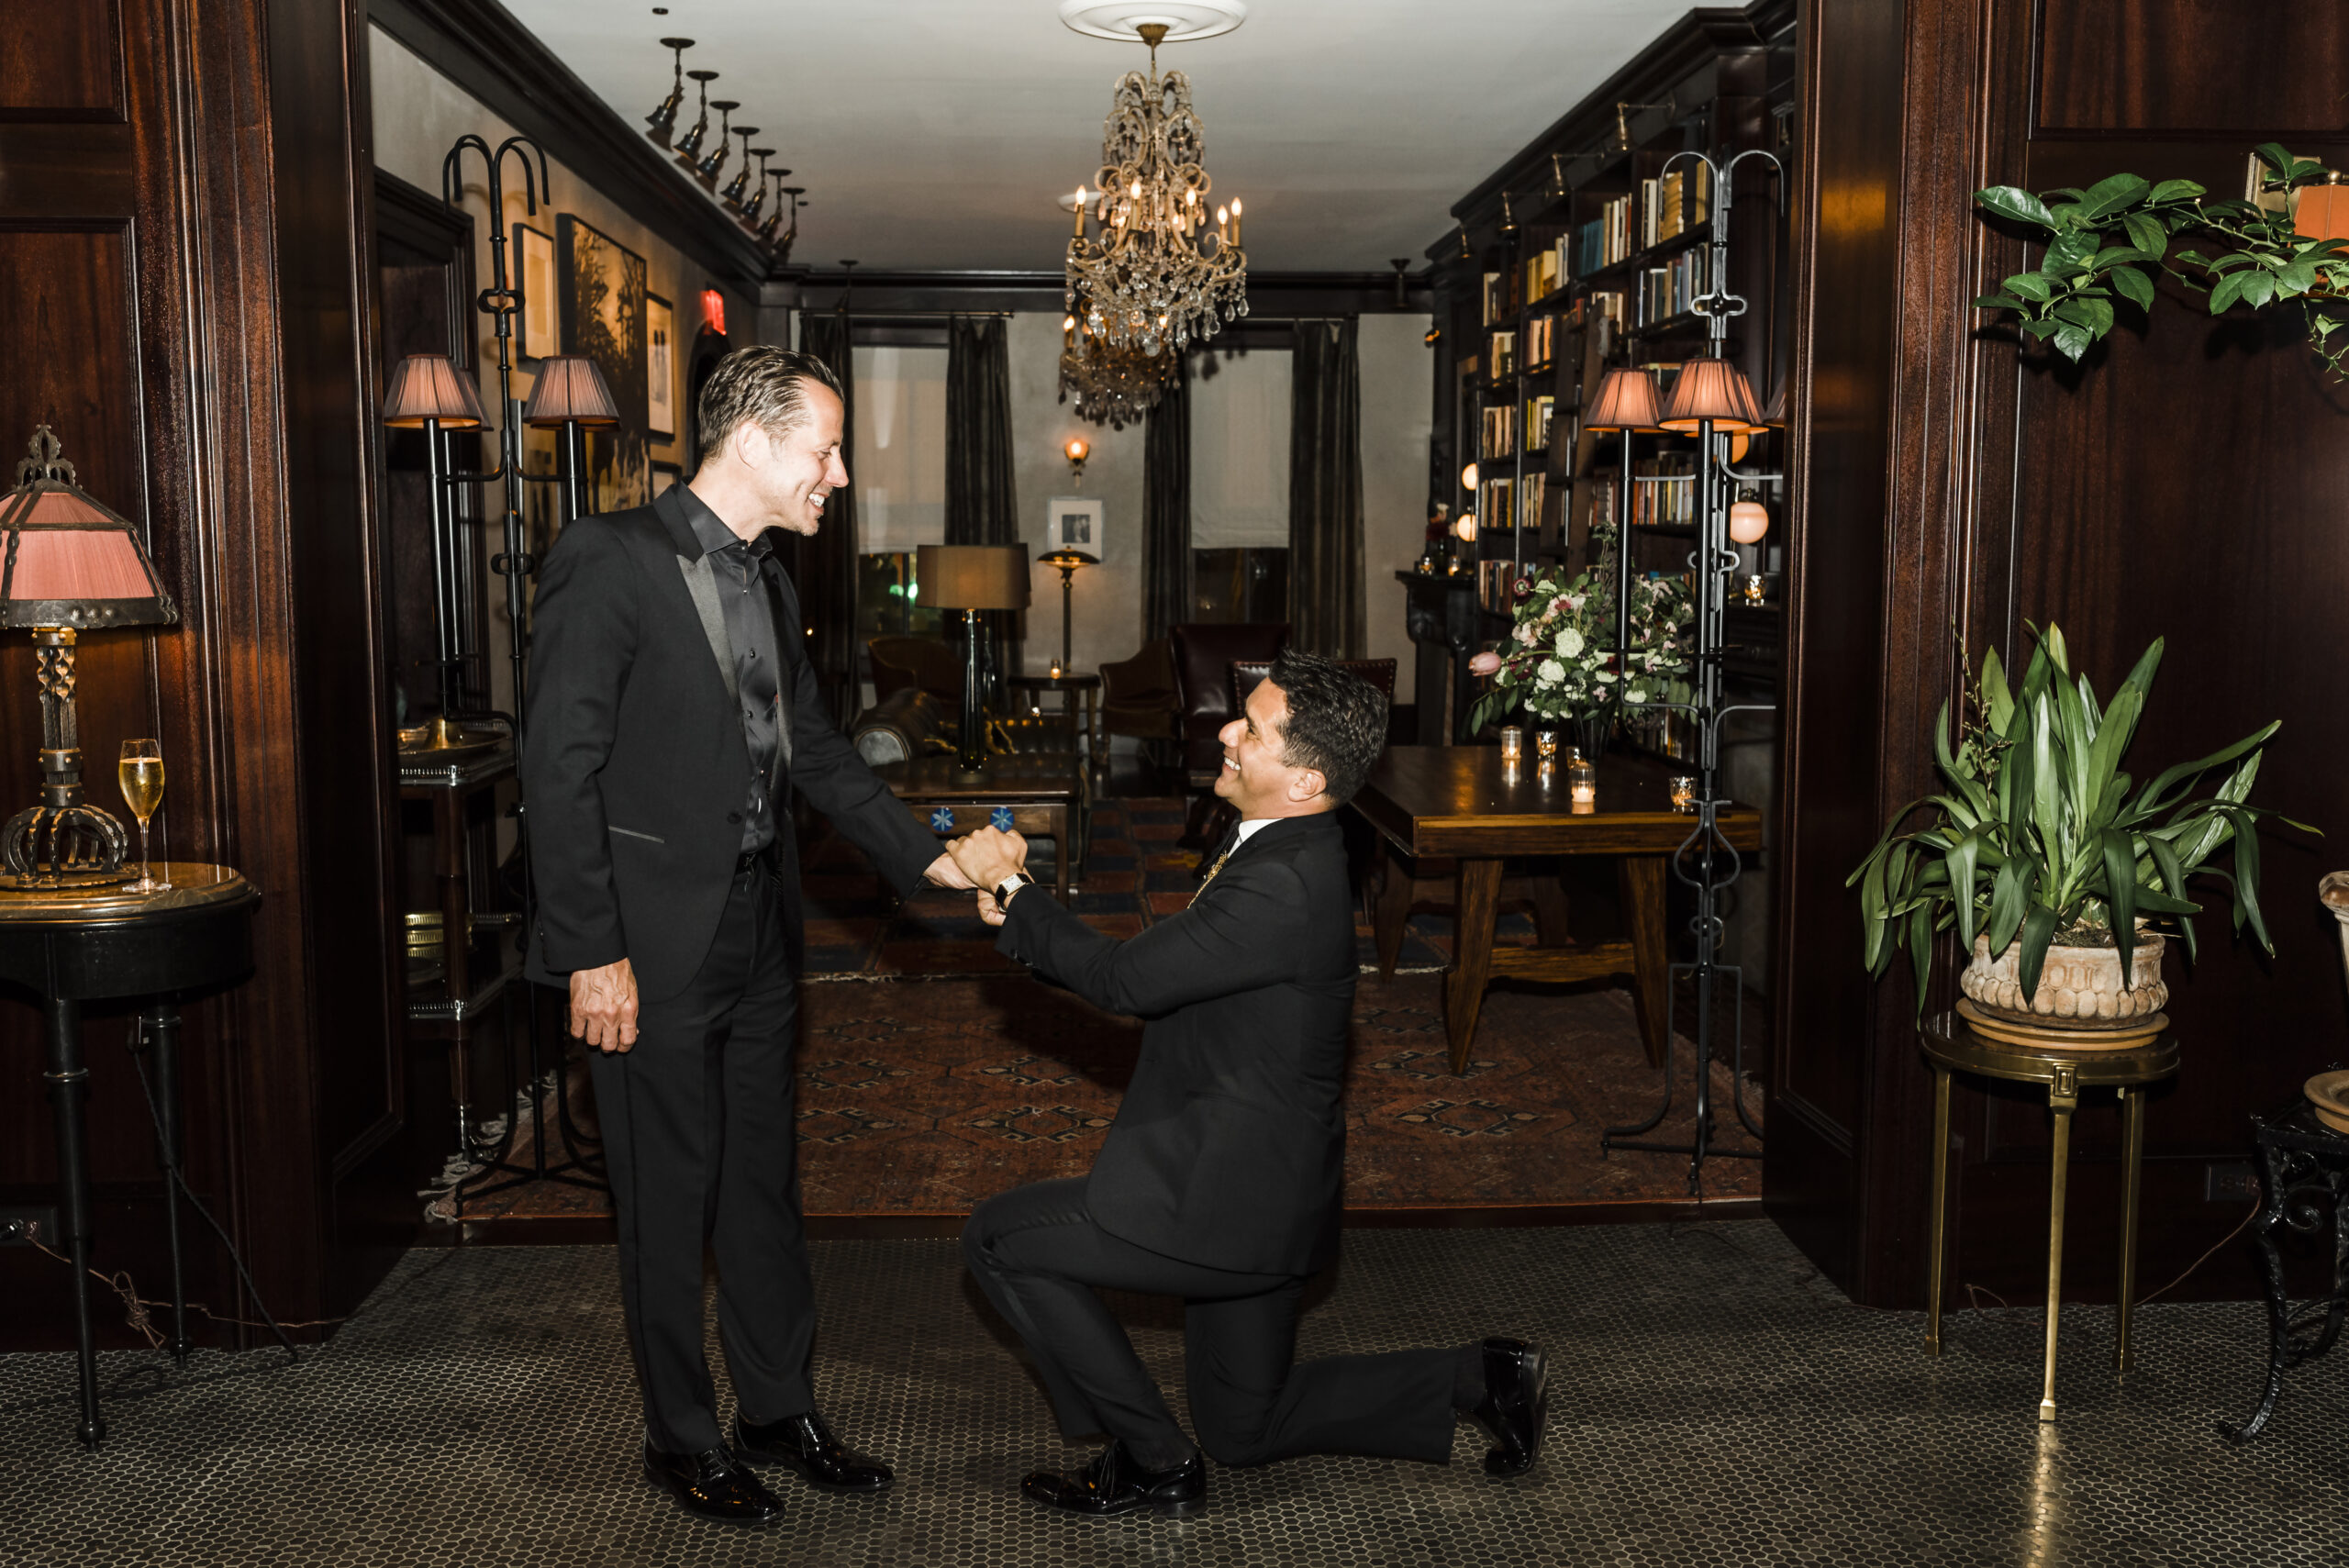 A Romantic Dinner Party Proposal with a dash of Burlesque